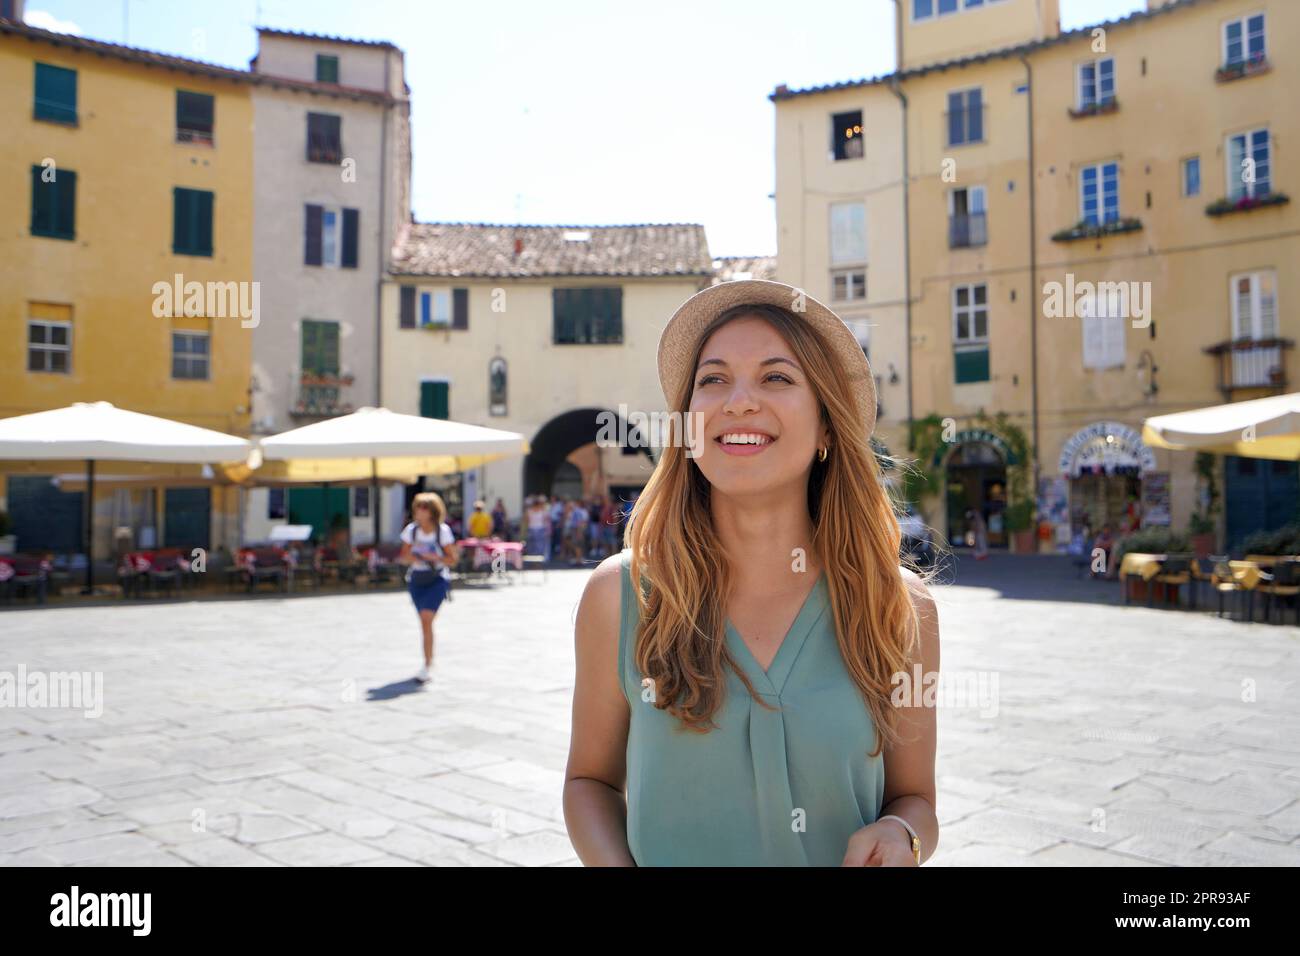 Discovering Italy. Cheerful young woman visiting the historic city of Lucca, Tuscany, Italy. Stock Photo